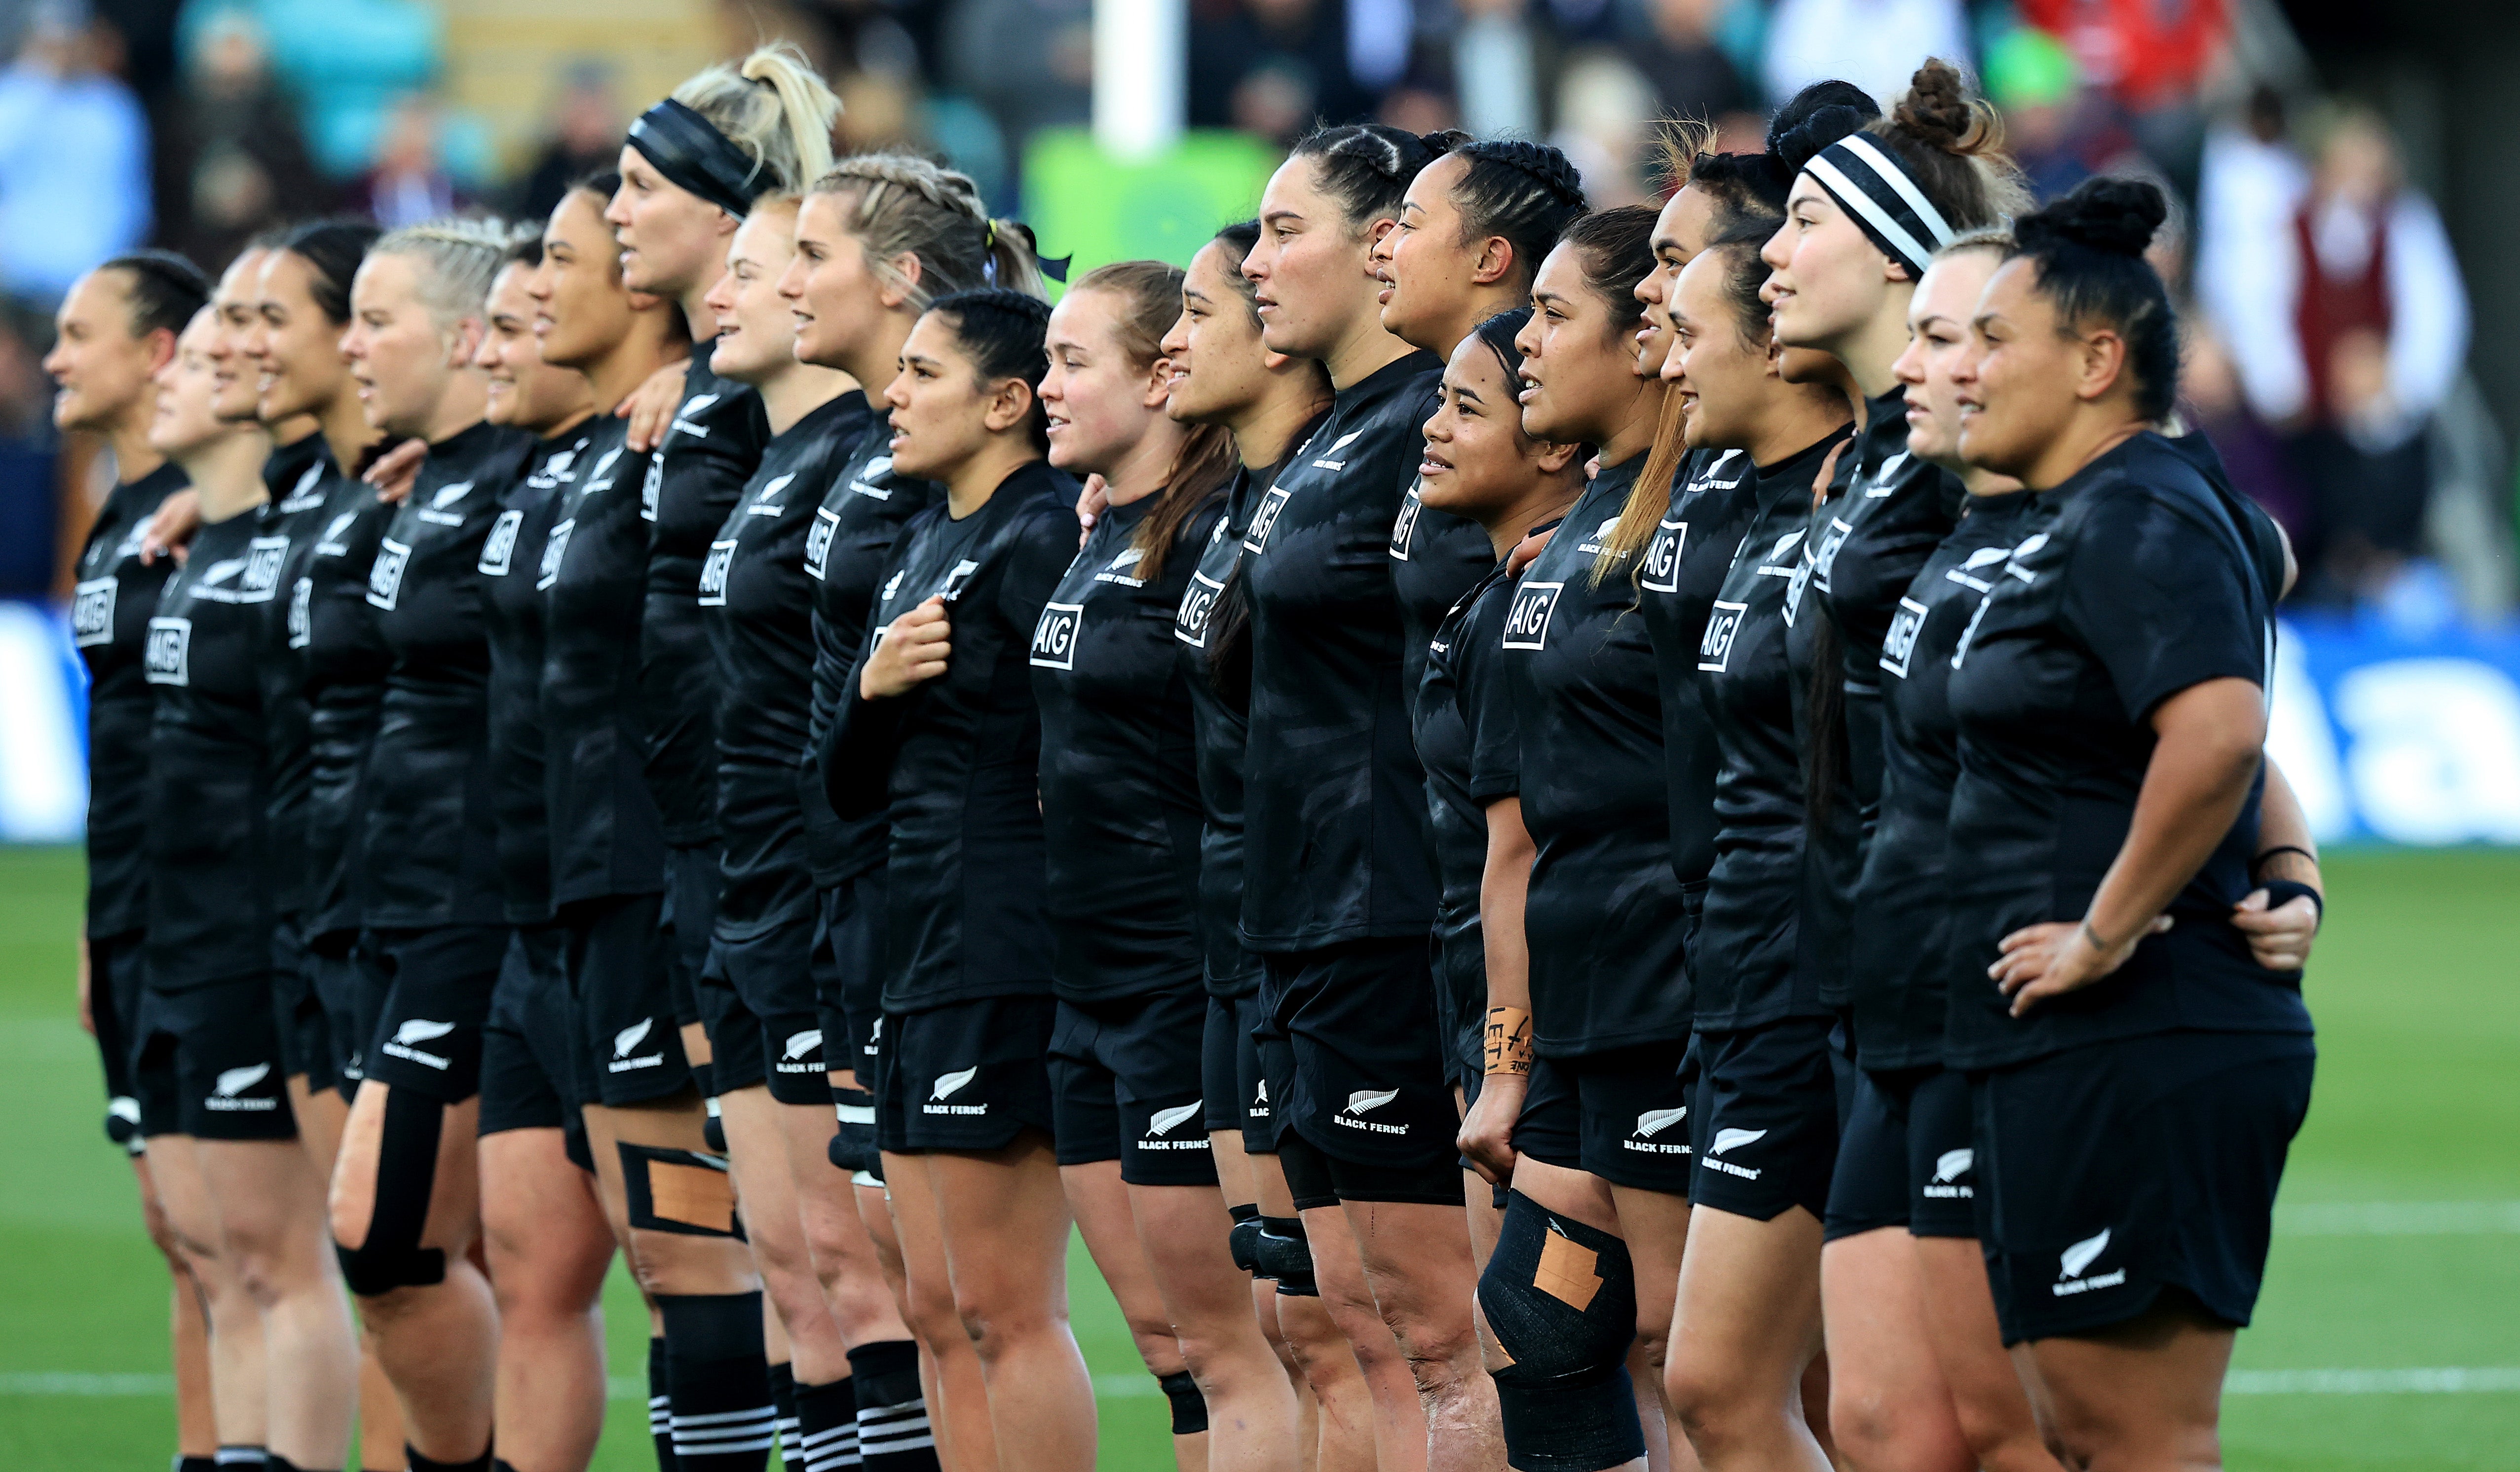 New Zealand Rugby wants ‘inclusive’ transgender policy after swimming